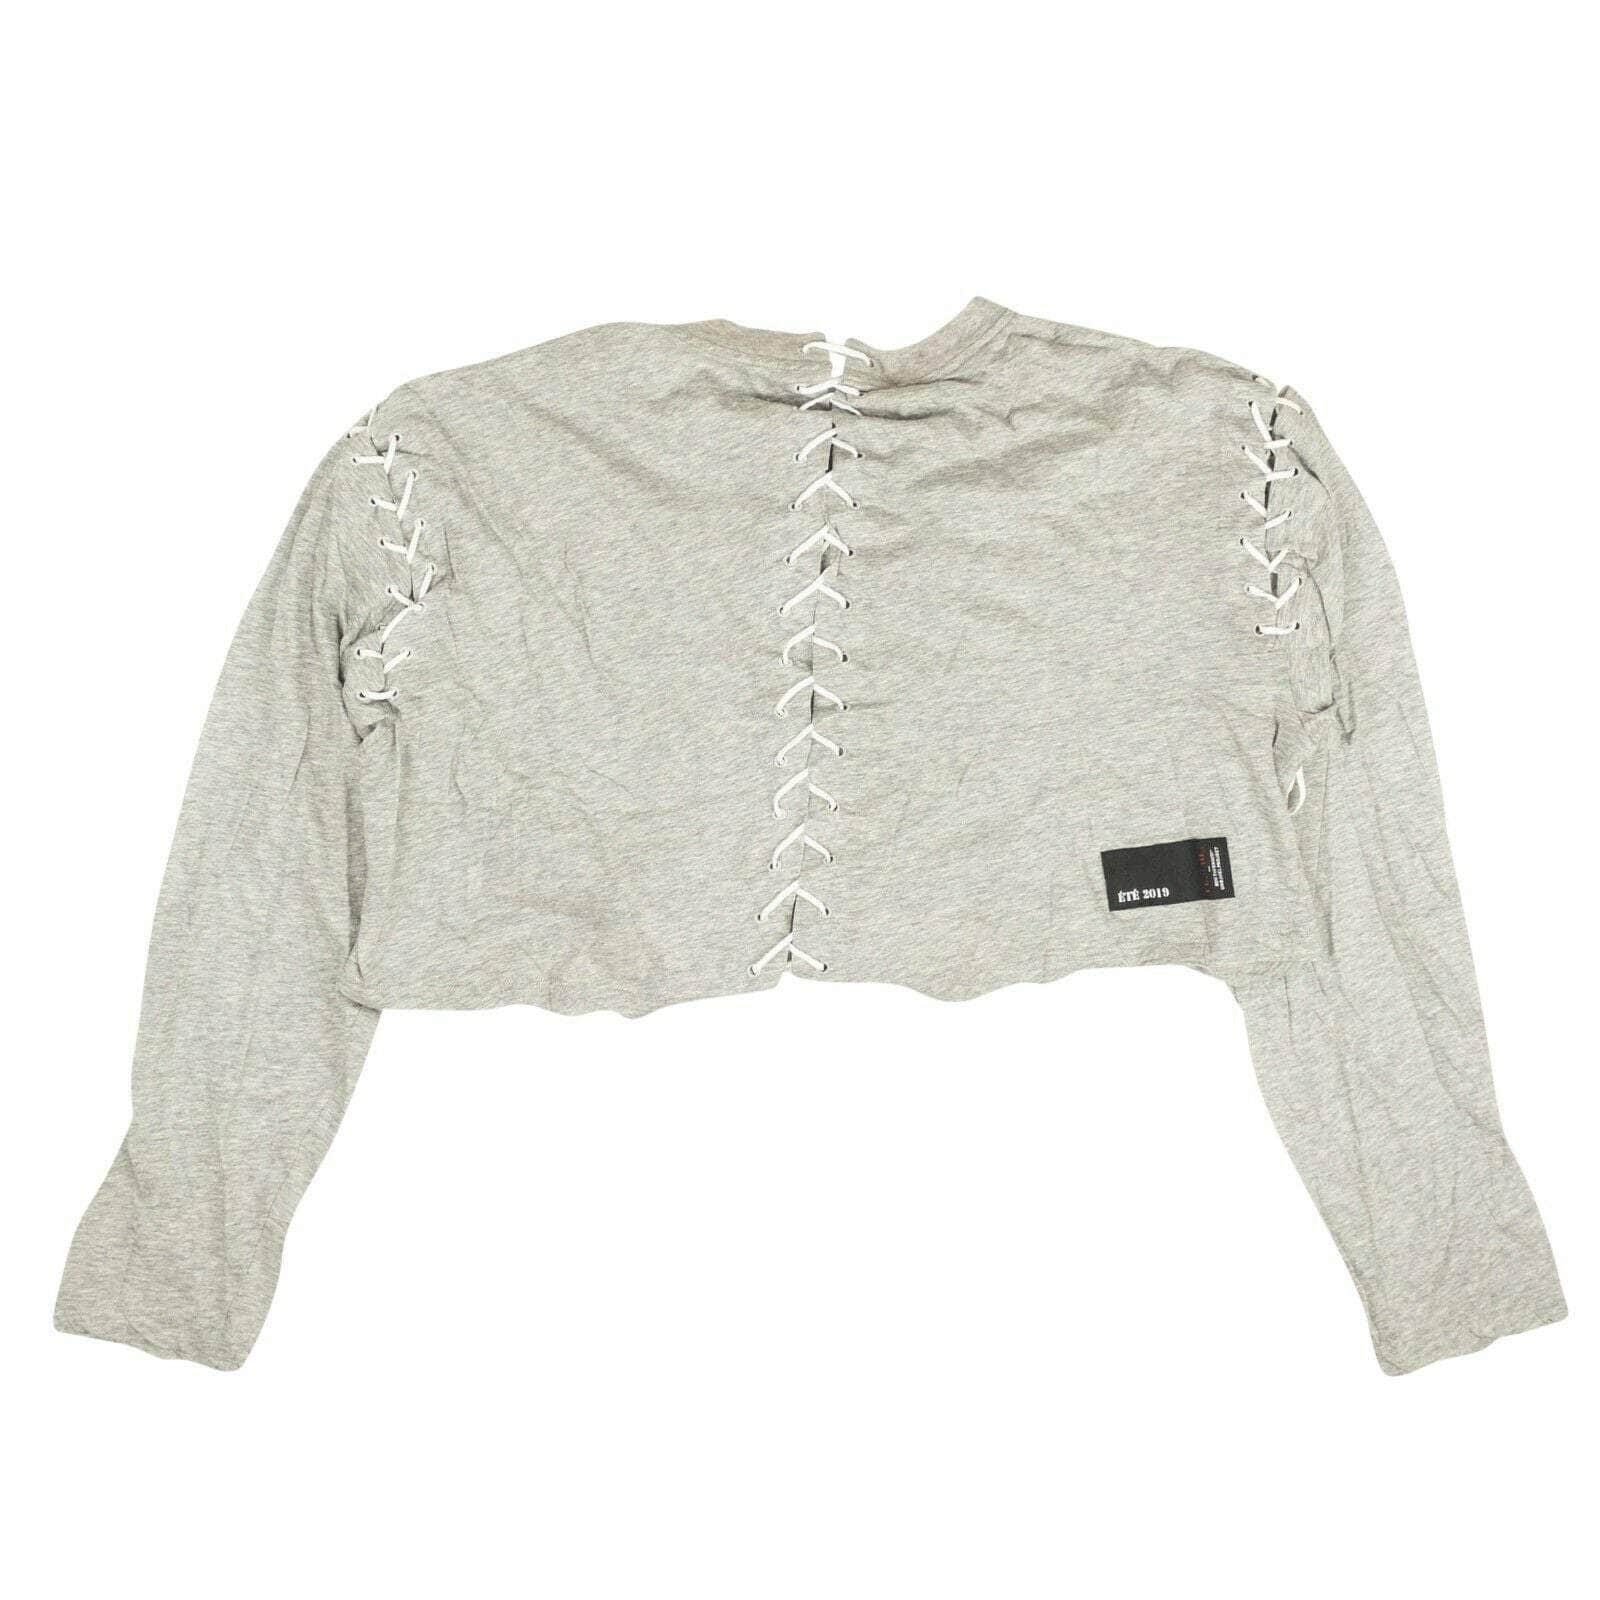 Unravel Project channelenable-all, chicmi, couponcollection, gender-womens, main-clothing, size-m, size-s, size-xs, size-xxs, under-250, unravel-project Gray Lace Cropped Long Sleeve T-Shirt